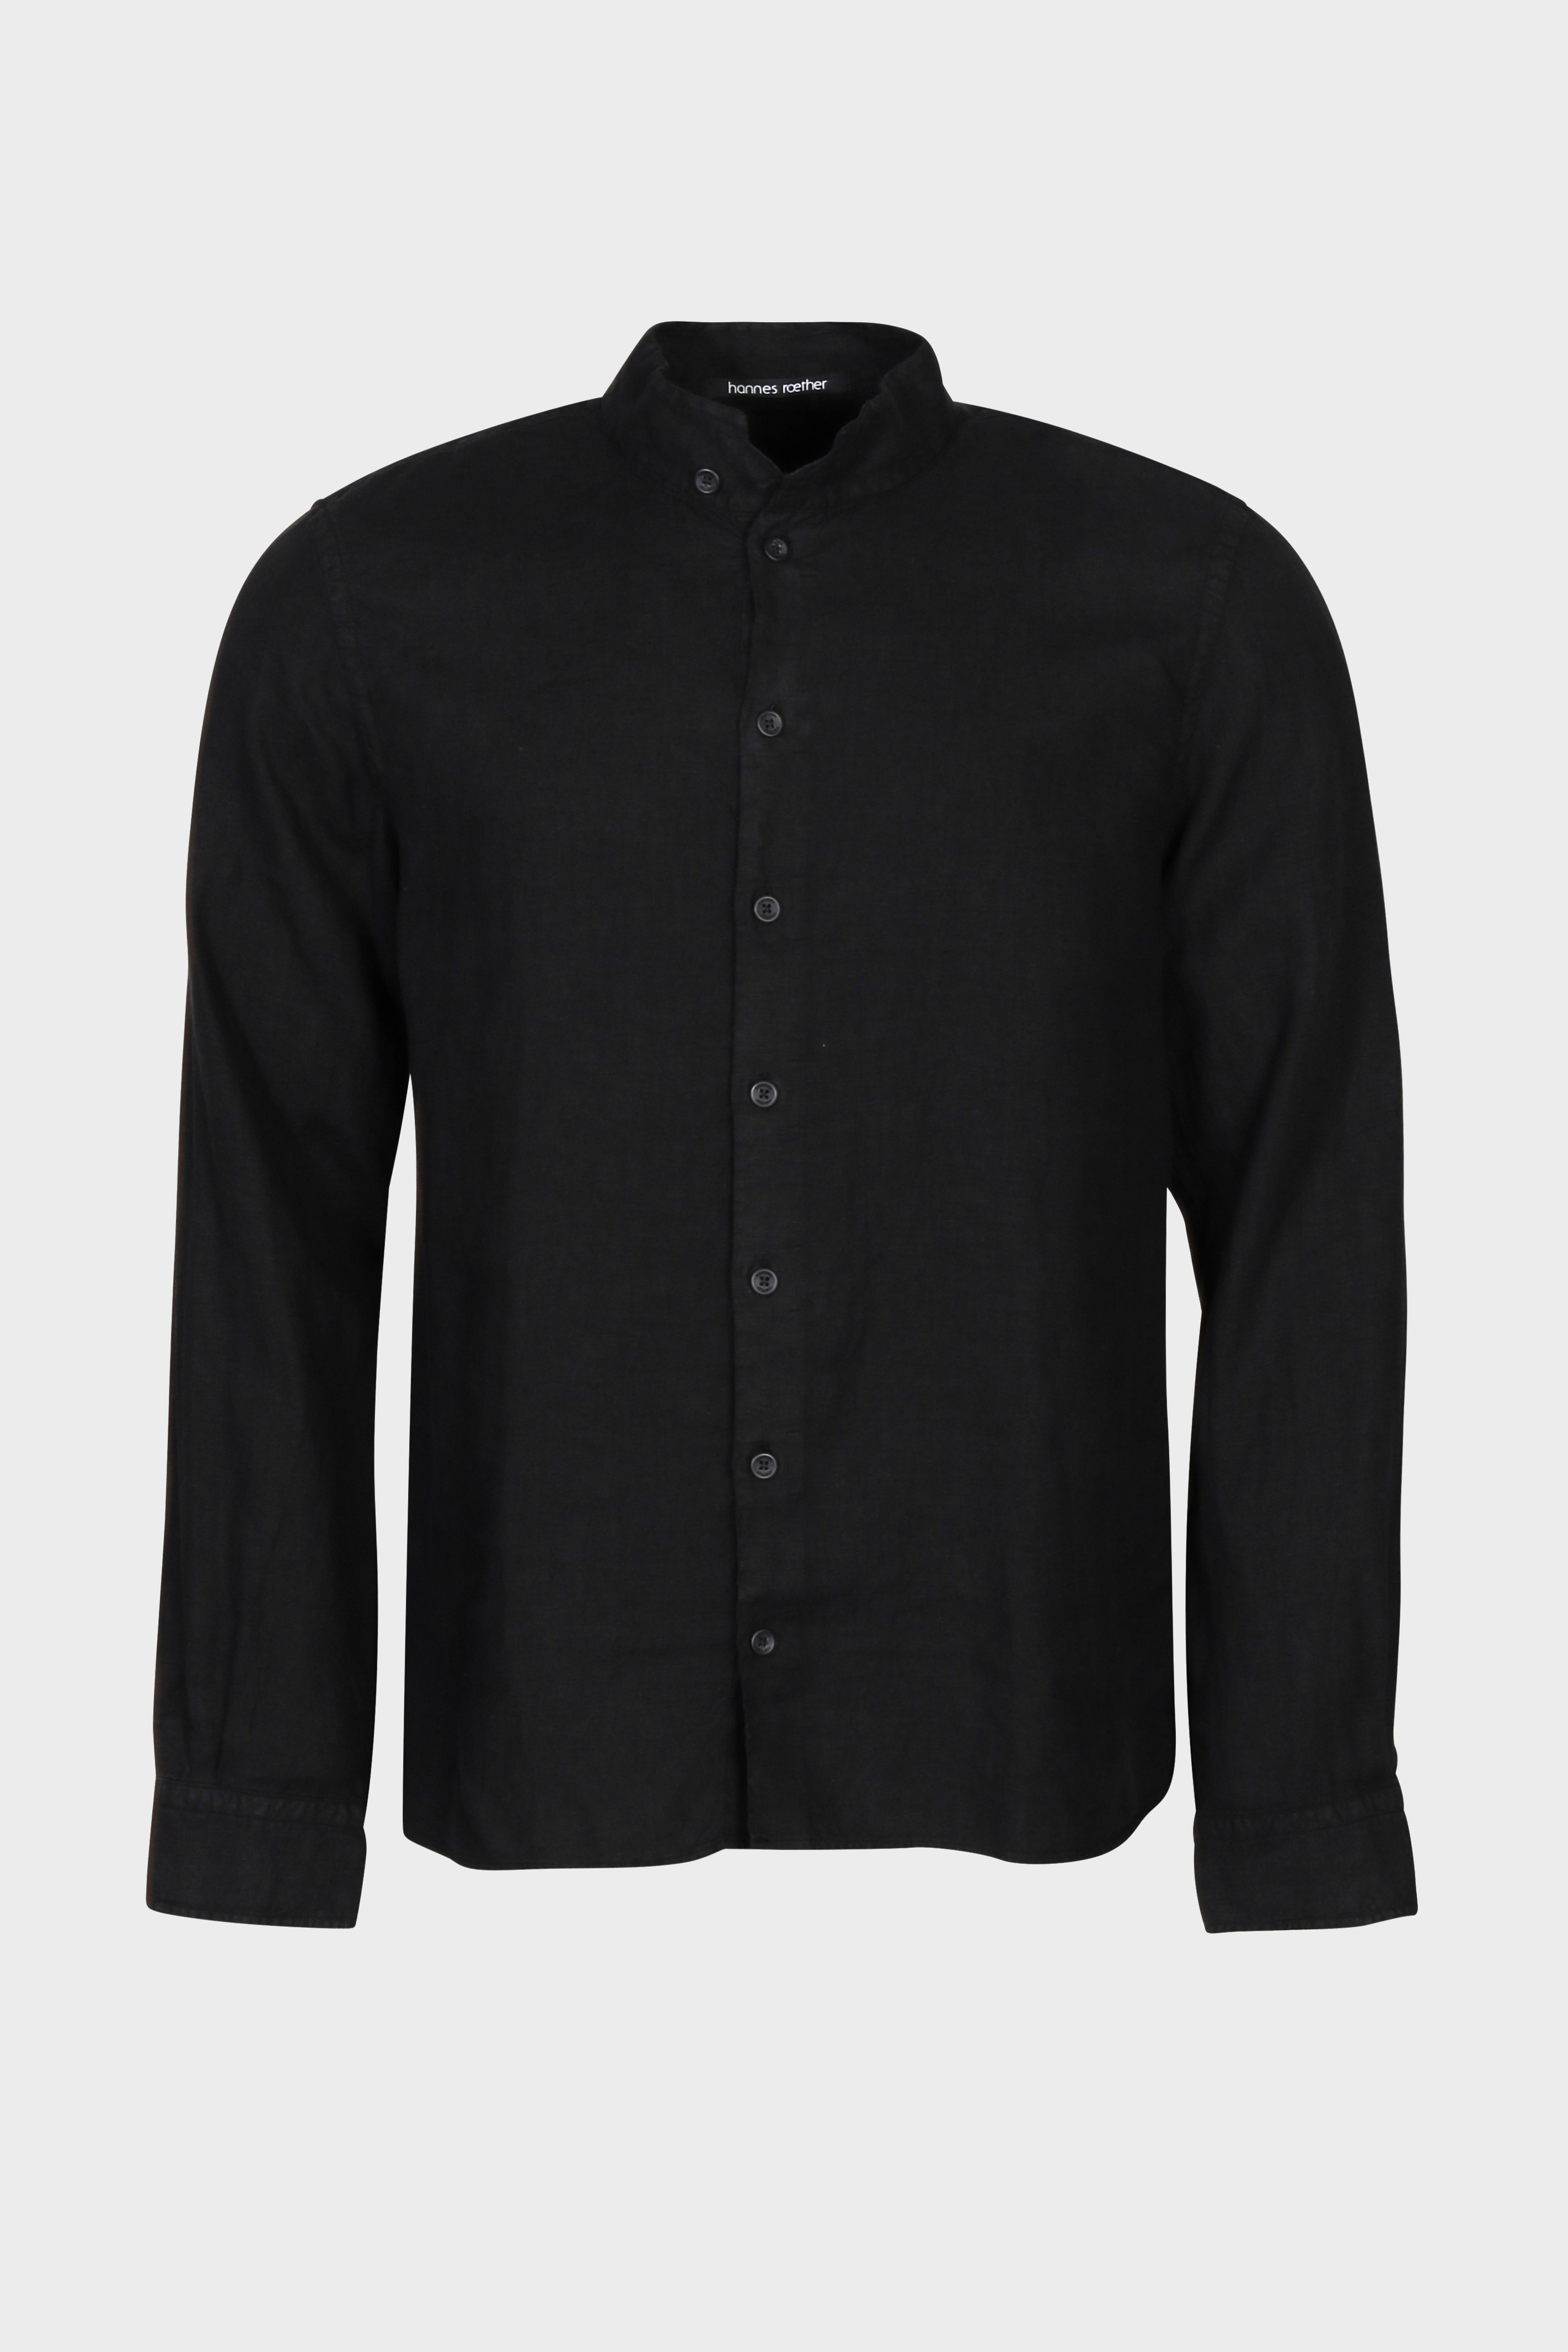 HANNES ROETHER Linen Shirt in Black L